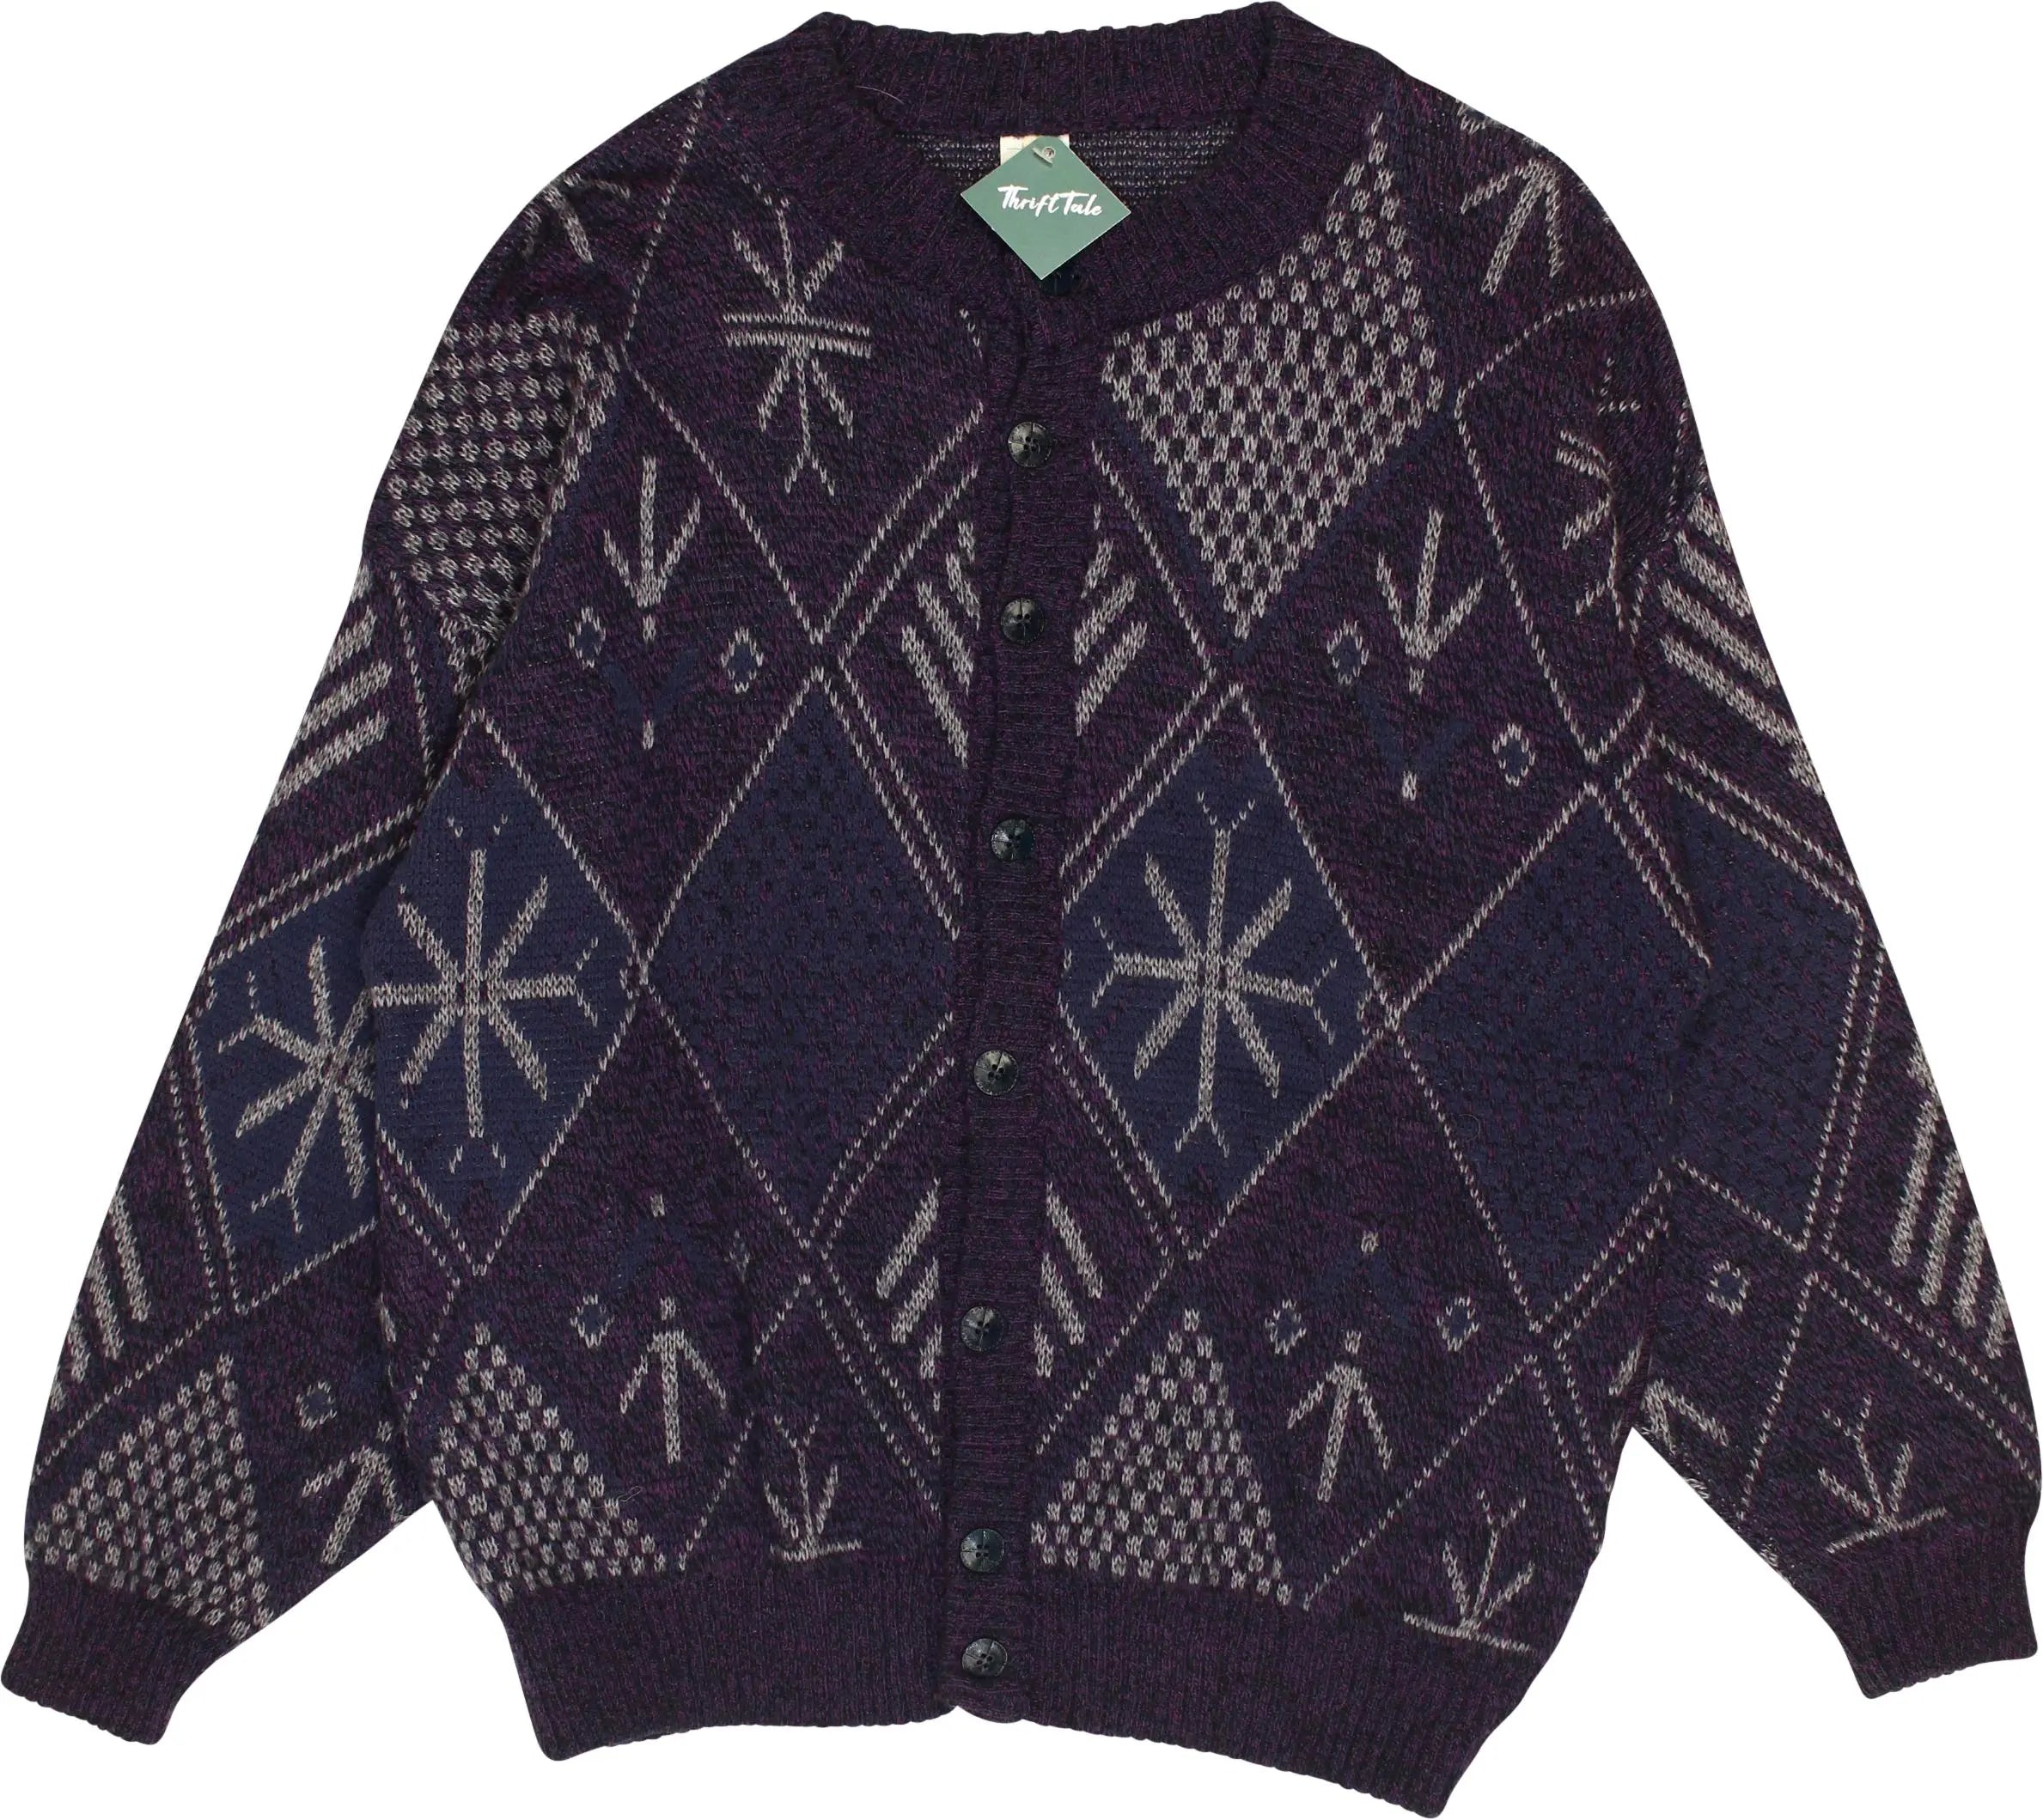 Unknown - 80s Wool Blend Cardigan- ThriftTale.com - Vintage and second handclothing